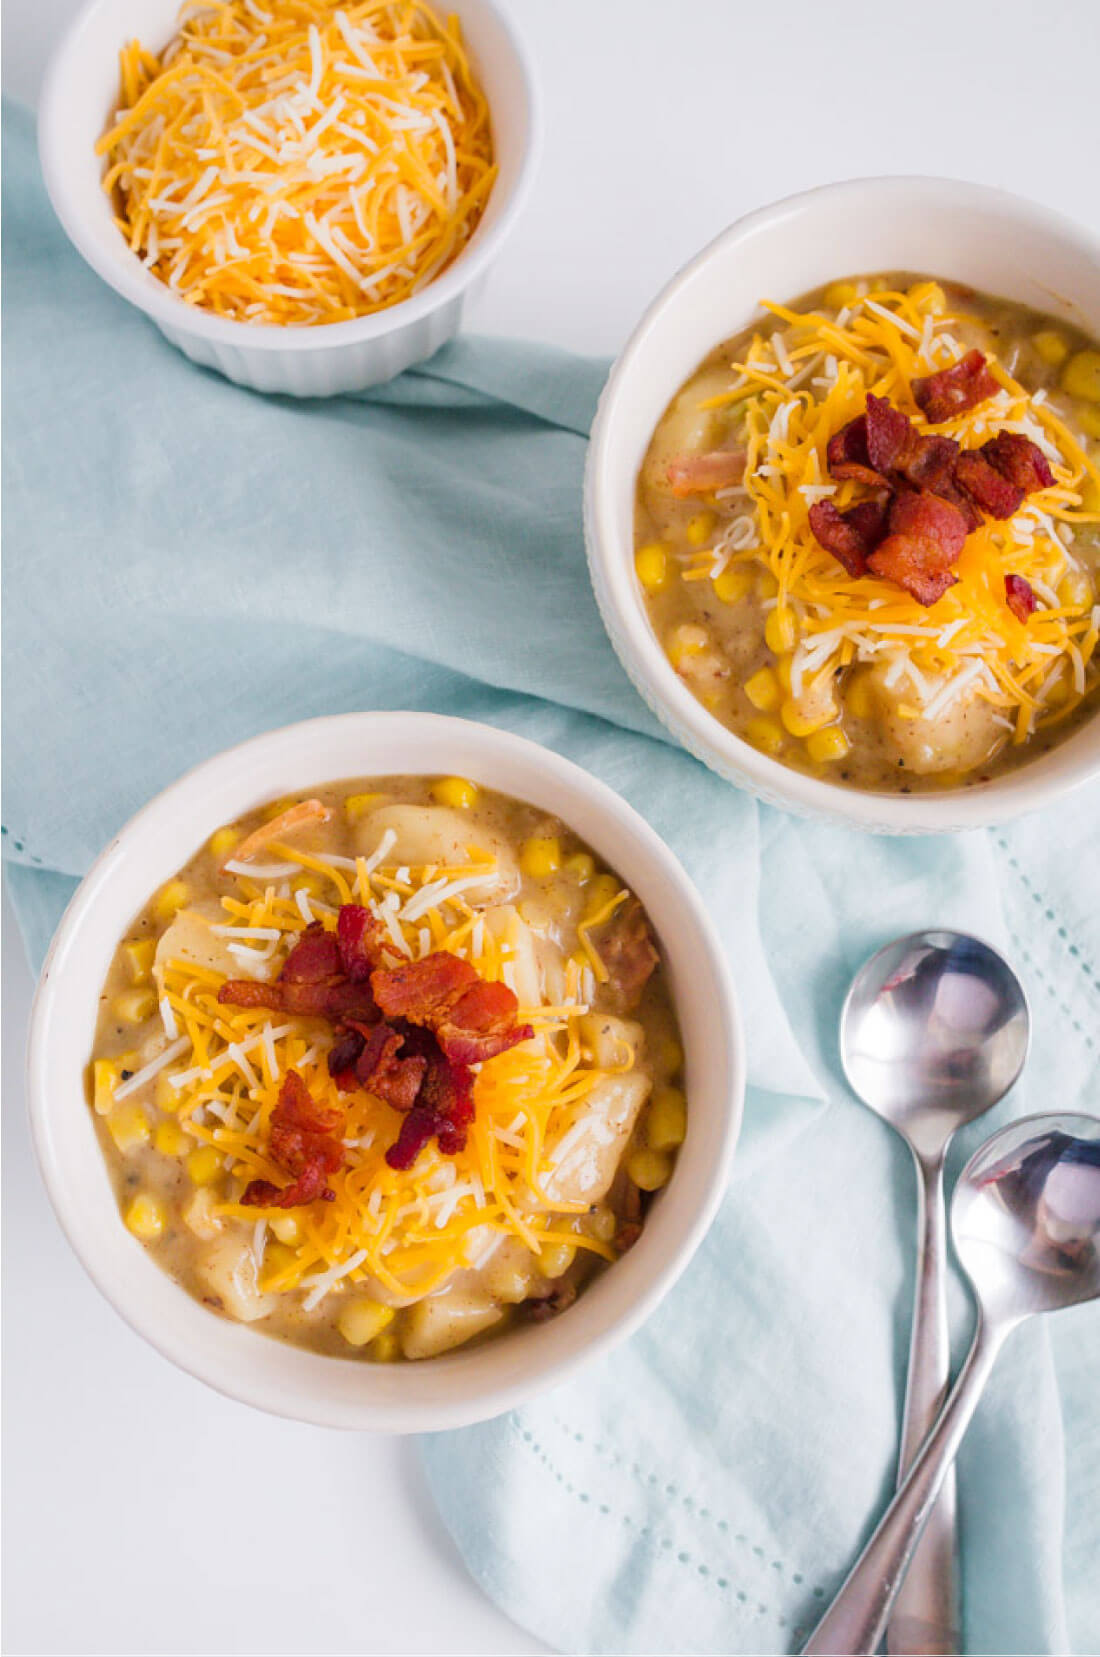 Slow Cooker Corn Chowder - the perfect thing to make in the fall to warm you up. So good and easy to make! from www.thirtyhandmadedays.com